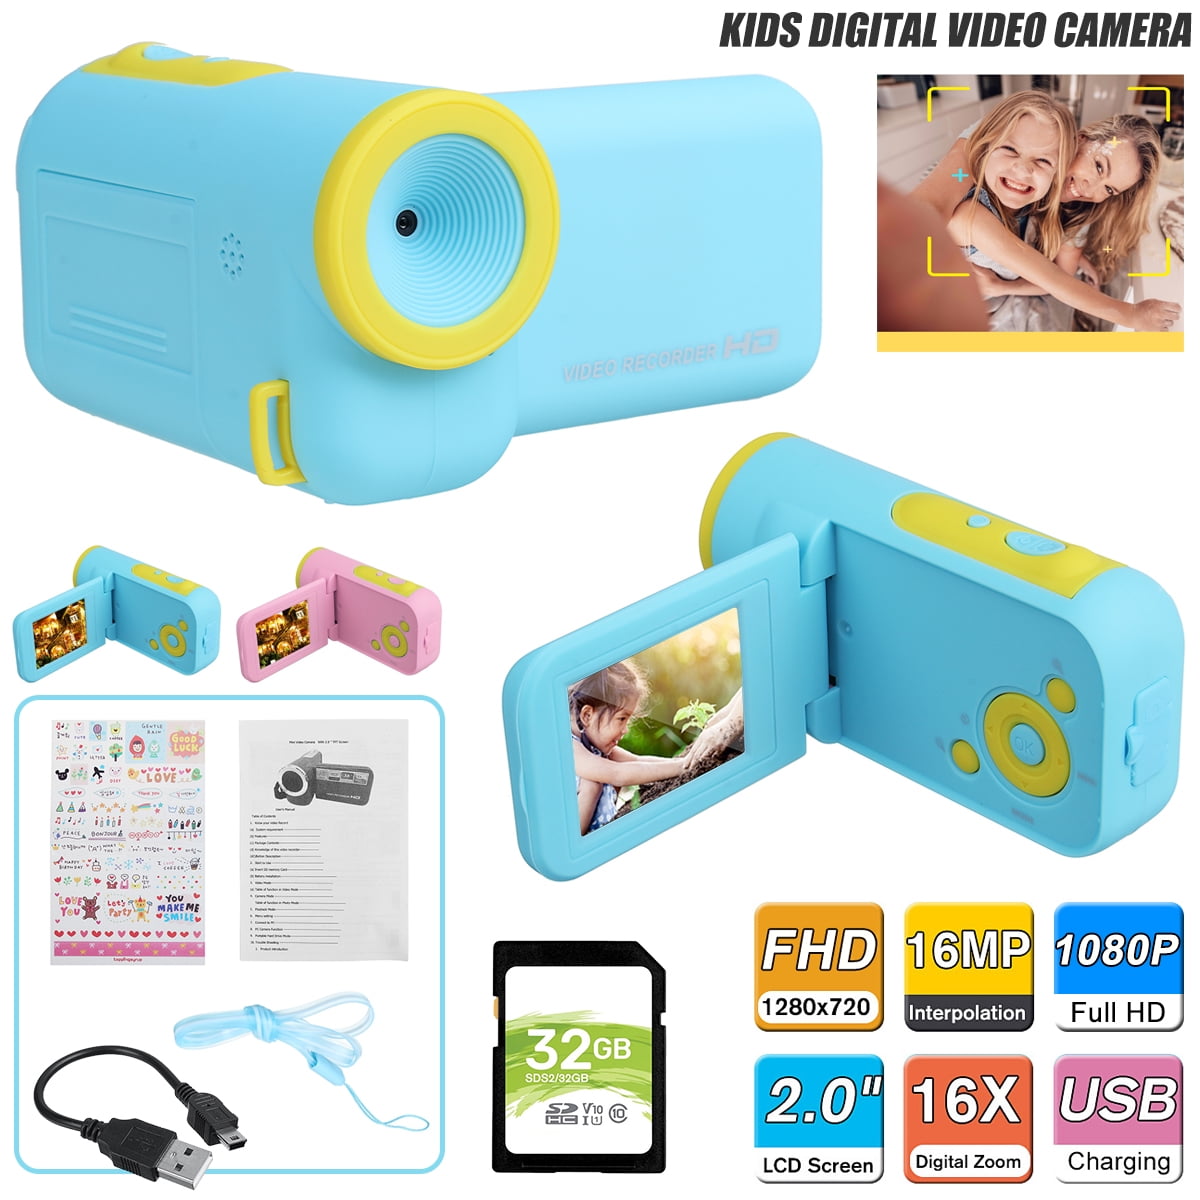 8GB Memory Card Prink Camera for Kids,720P Video Recorder Sport Action Camera Camcorder with 16MP HD Photo Resolution Kid Camera for Children Boys Girls Gift Camera Toys with Mini 1.77 Inch Screen